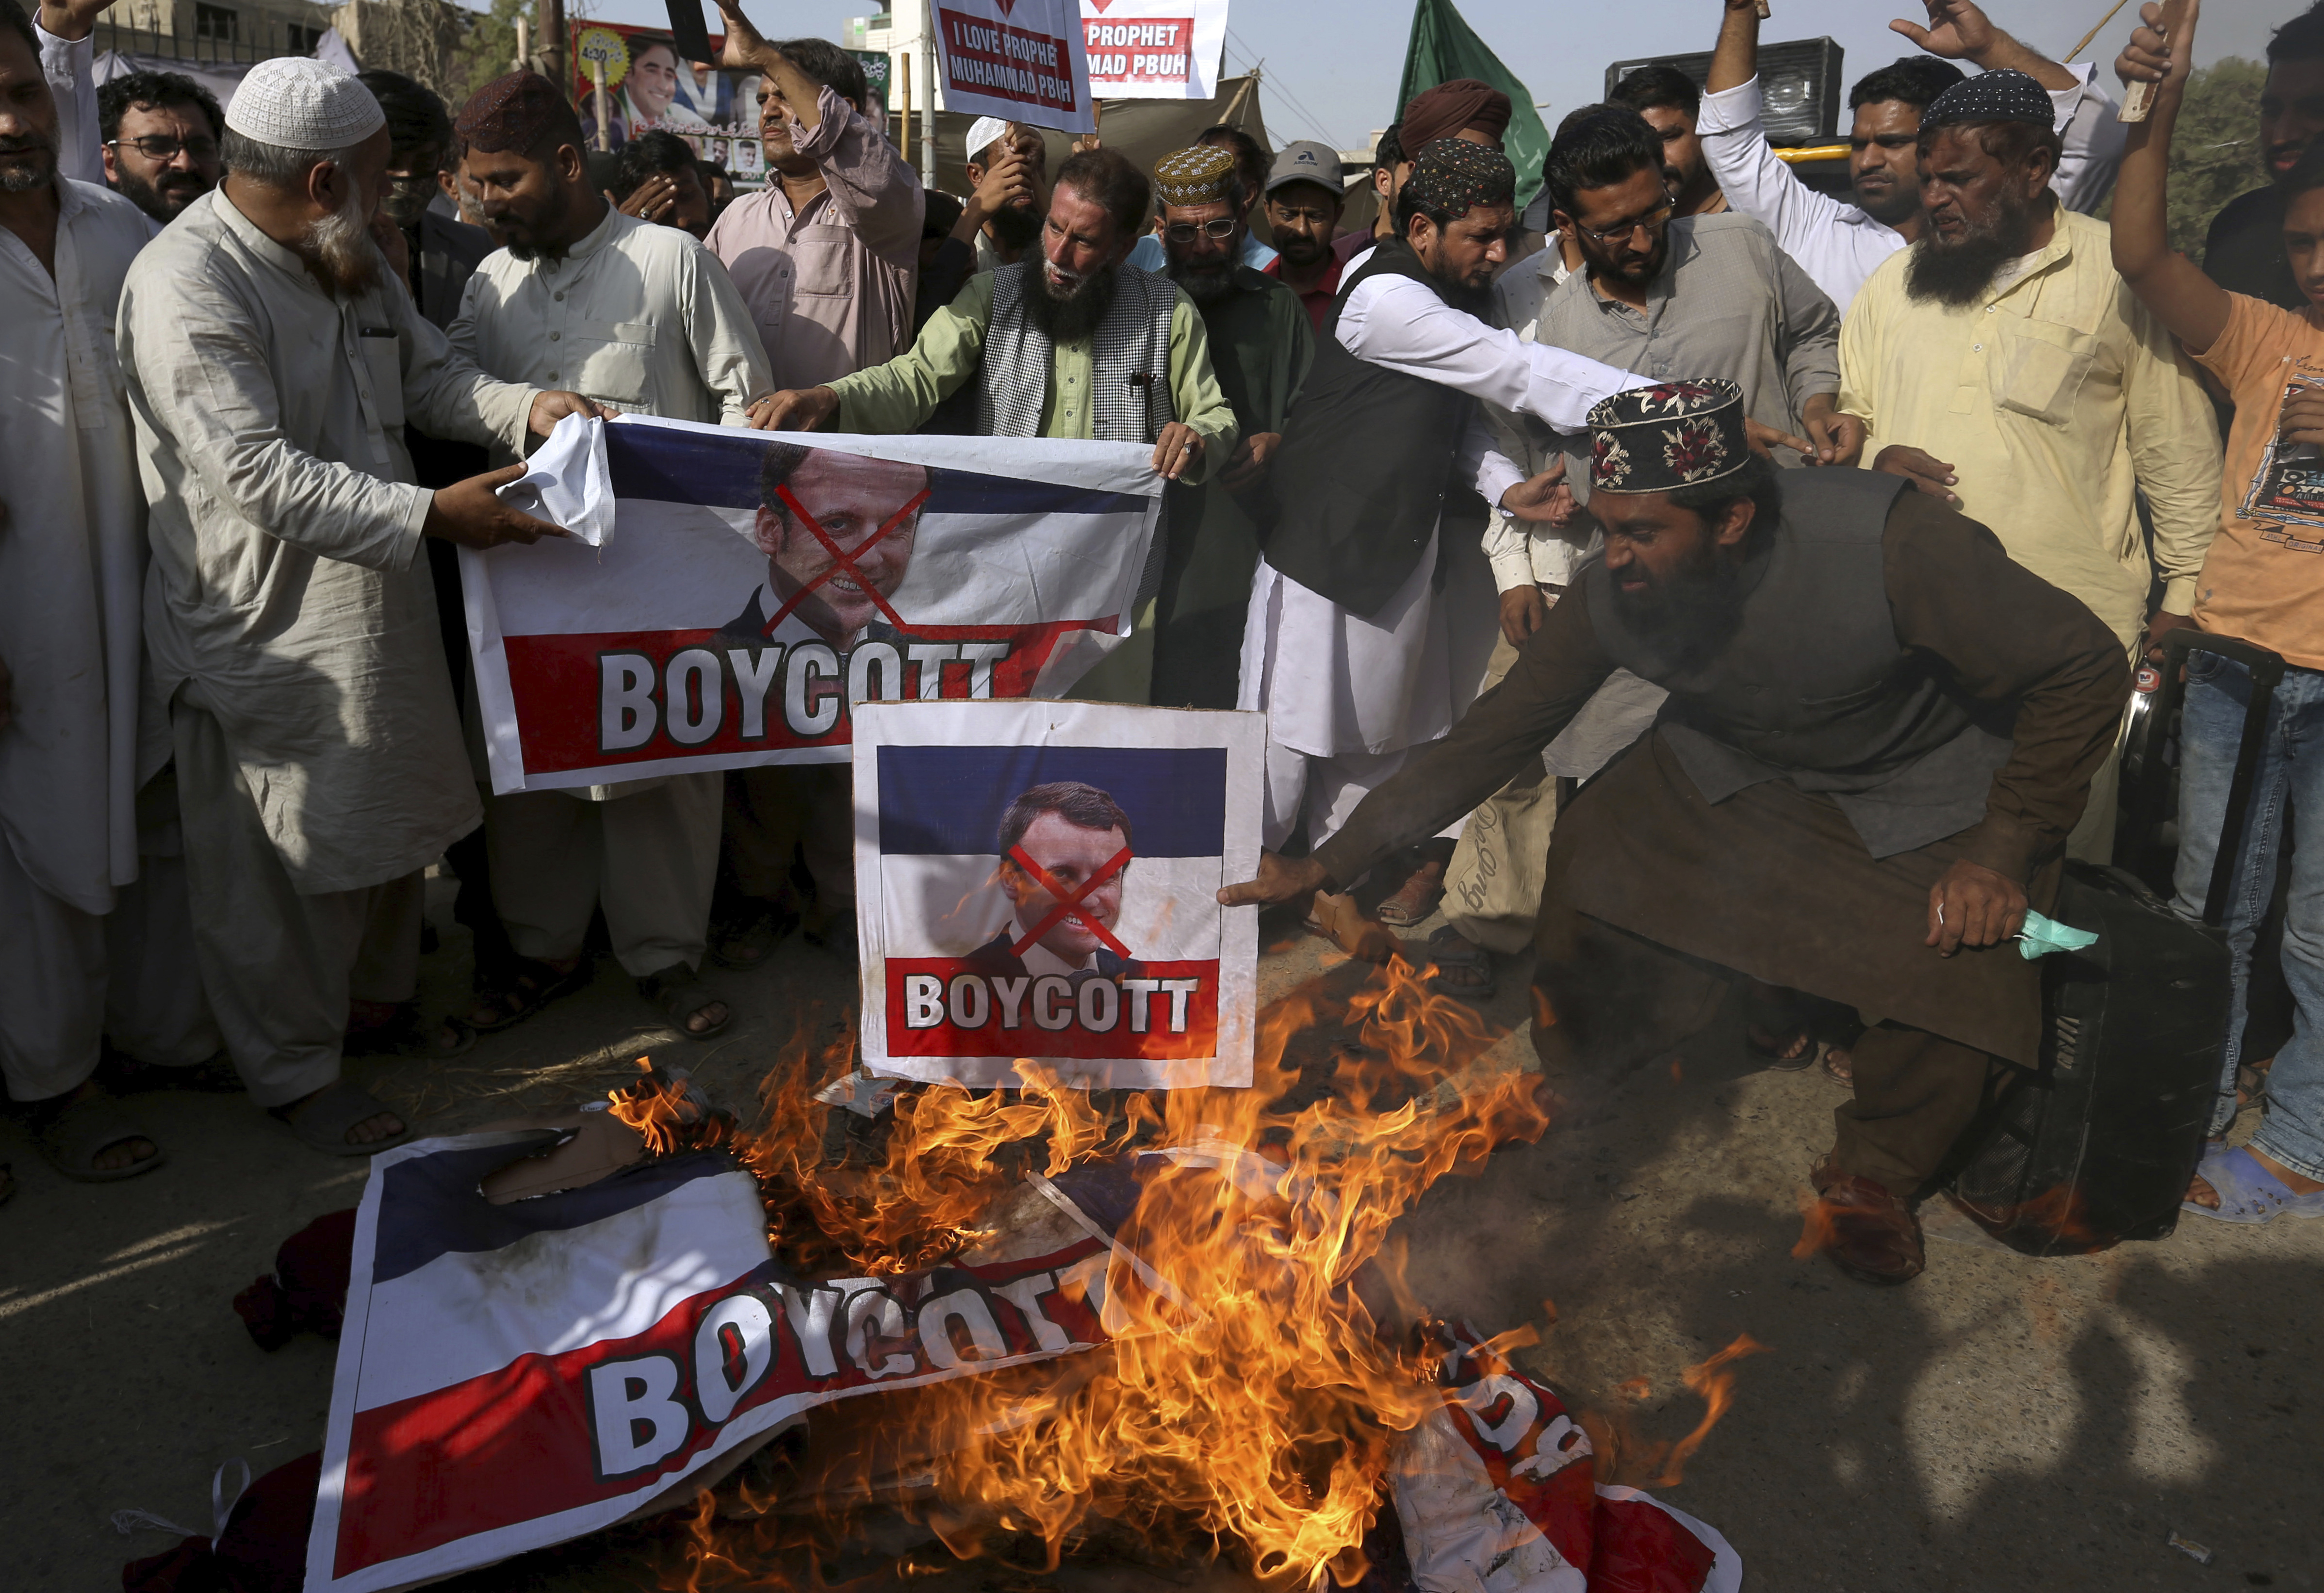 Supporters of the religious group, "Tahaful-e-Islam Pakistan," burn representations of the French flags with defaced images of French President Emmanuel Macron during a protest against the publishing of caricatures of the Muslim Prophet Muhammad they deem blasphemous, in Karachi, Pakistan, Tuesday, Oct. 27, 2020. (AP Photo/Fareed Khan)